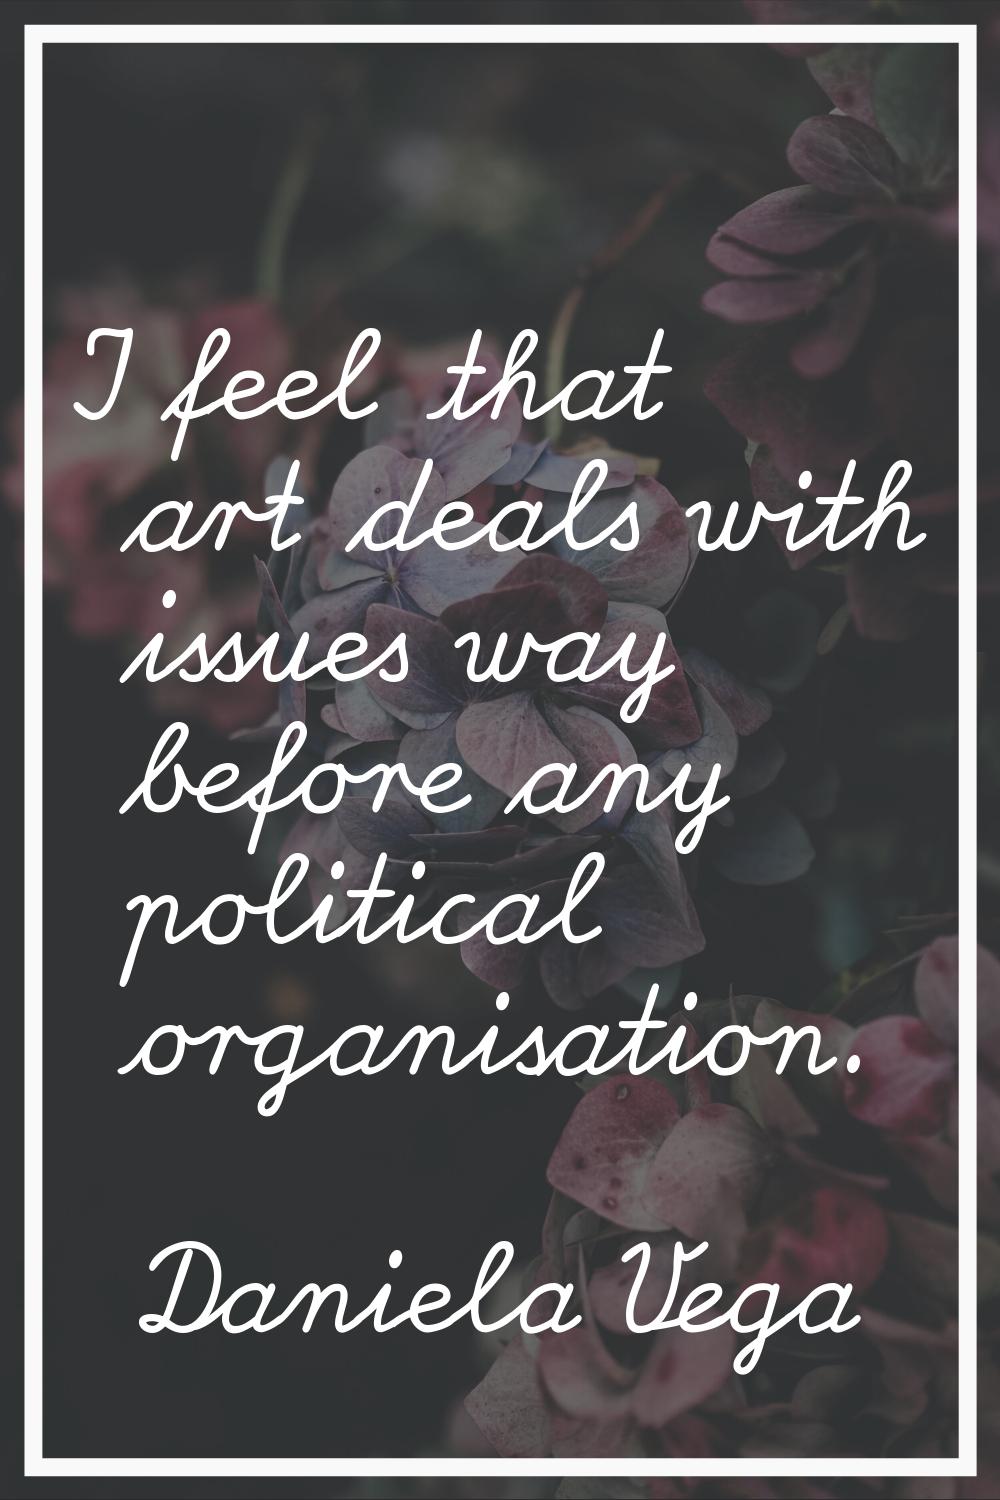 I feel that art deals with issues way before any political organisation.